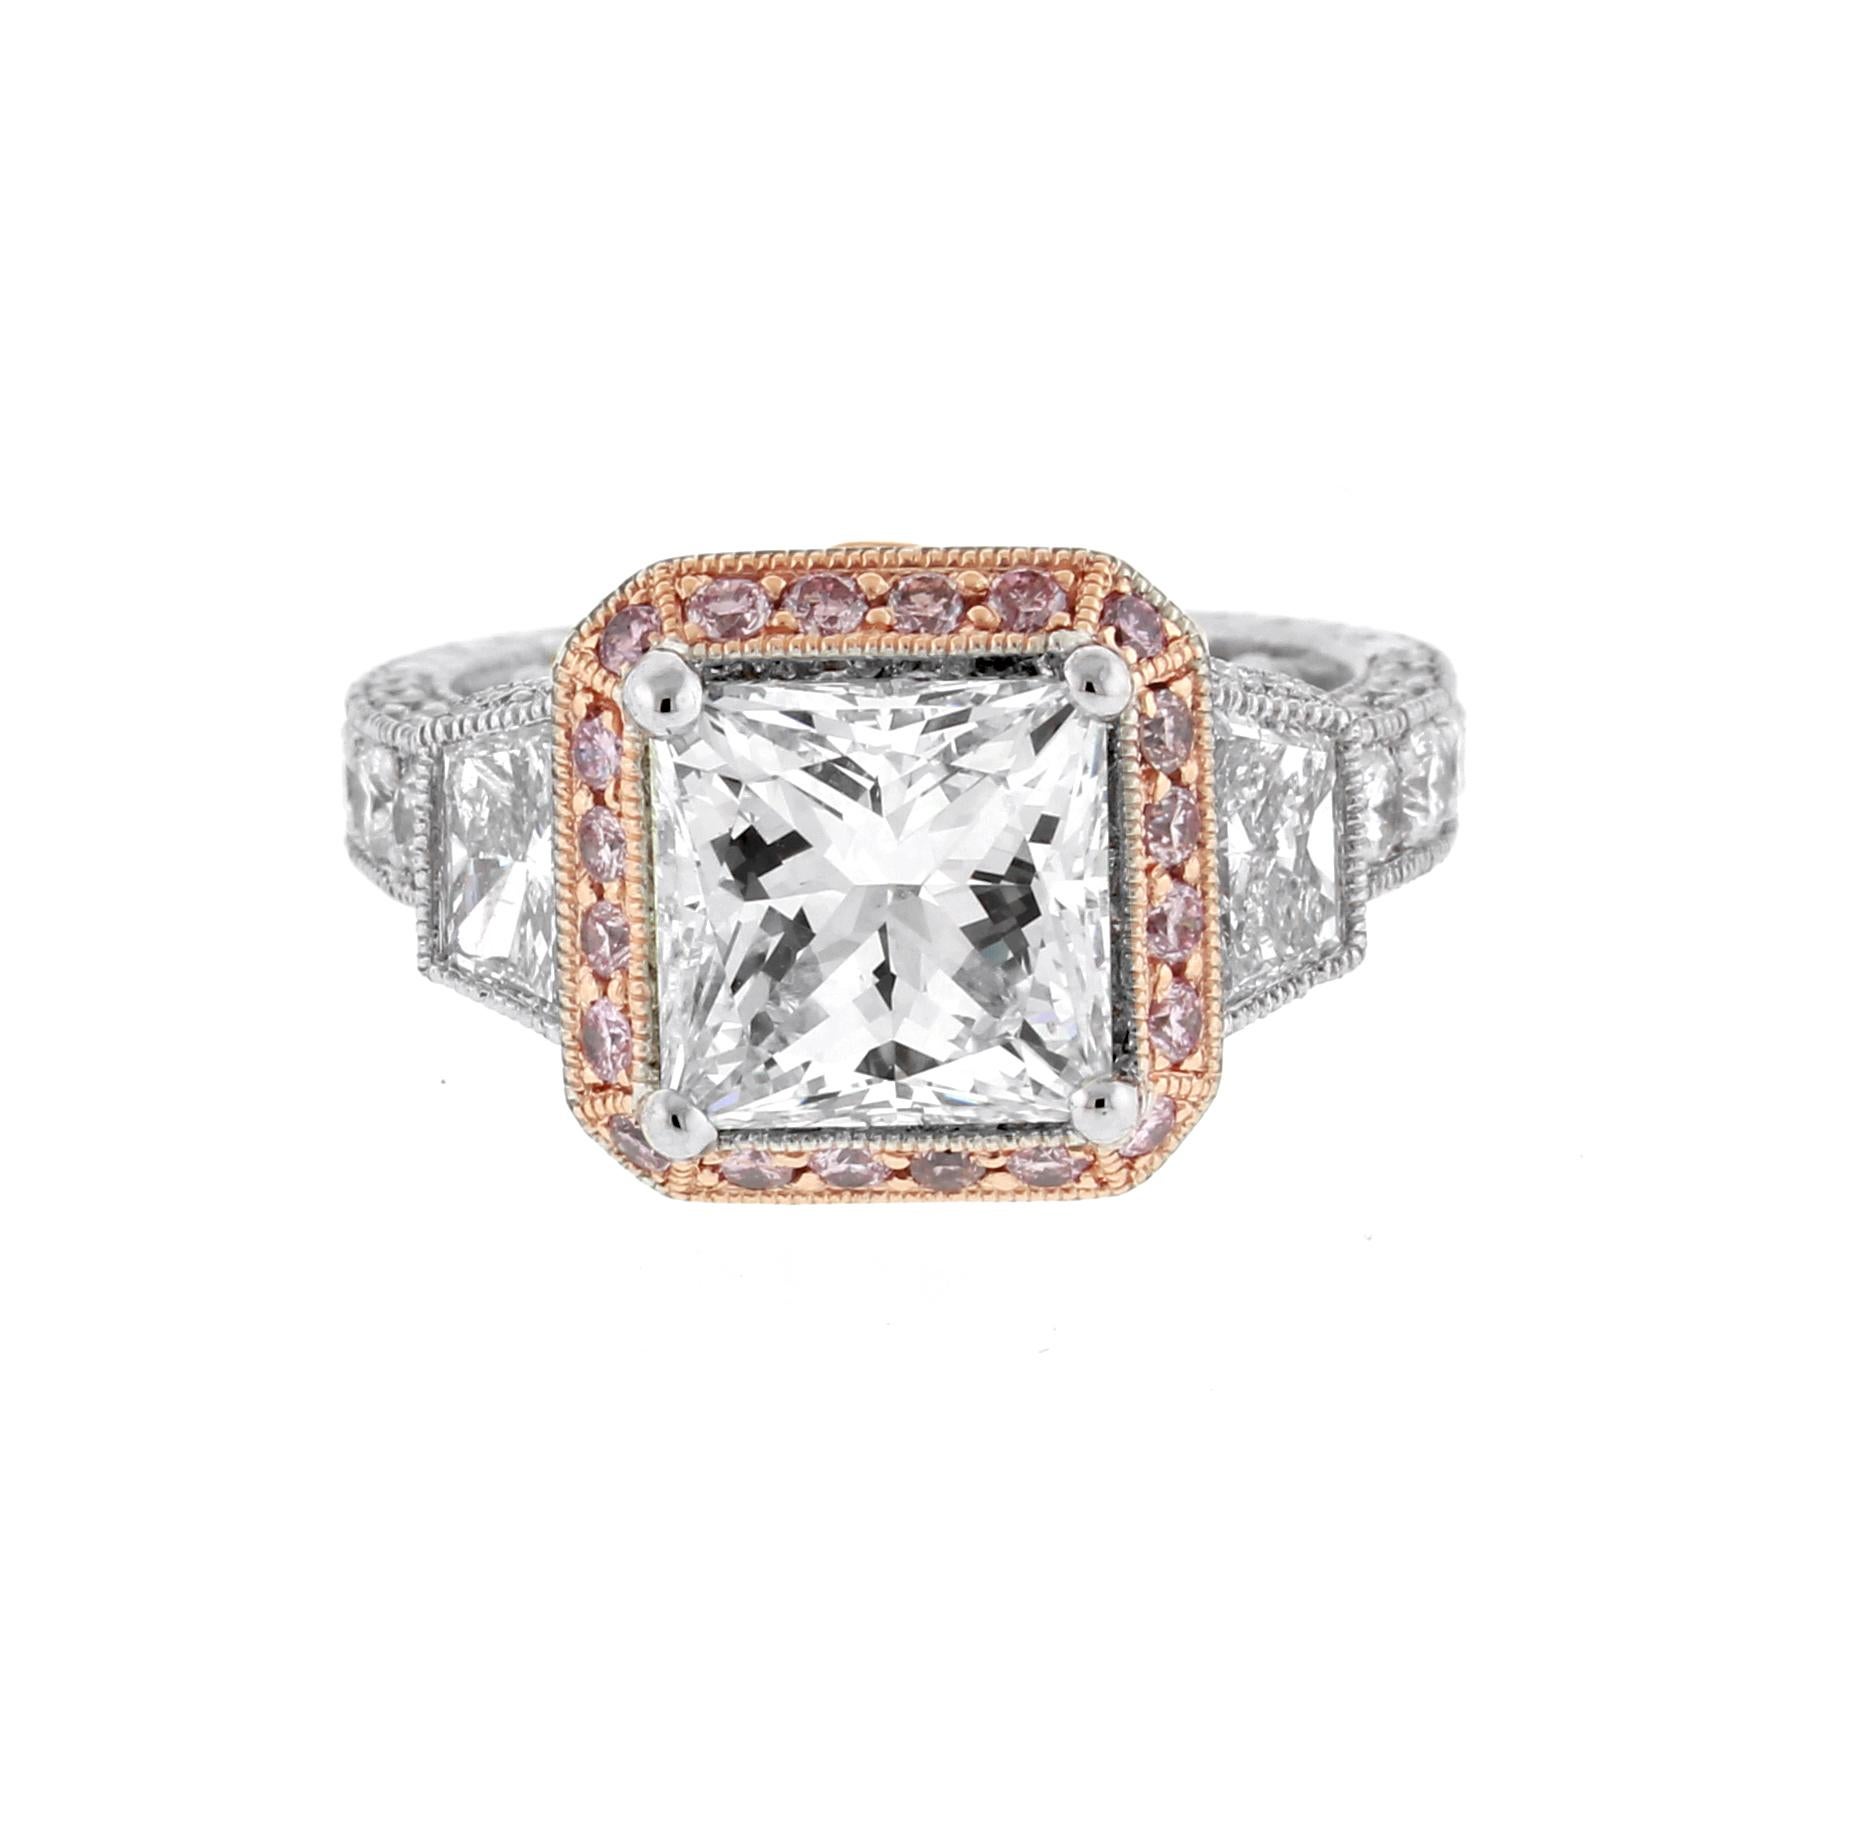 From the  the Jack Kelége Heratage collection,  a 3 carat princess cut diamond surrounded by natural pink diamonds with diamond trapezoids and white diamonds. The Heritage Collection radiates a sense of luxurious creativity that is expertly tailored